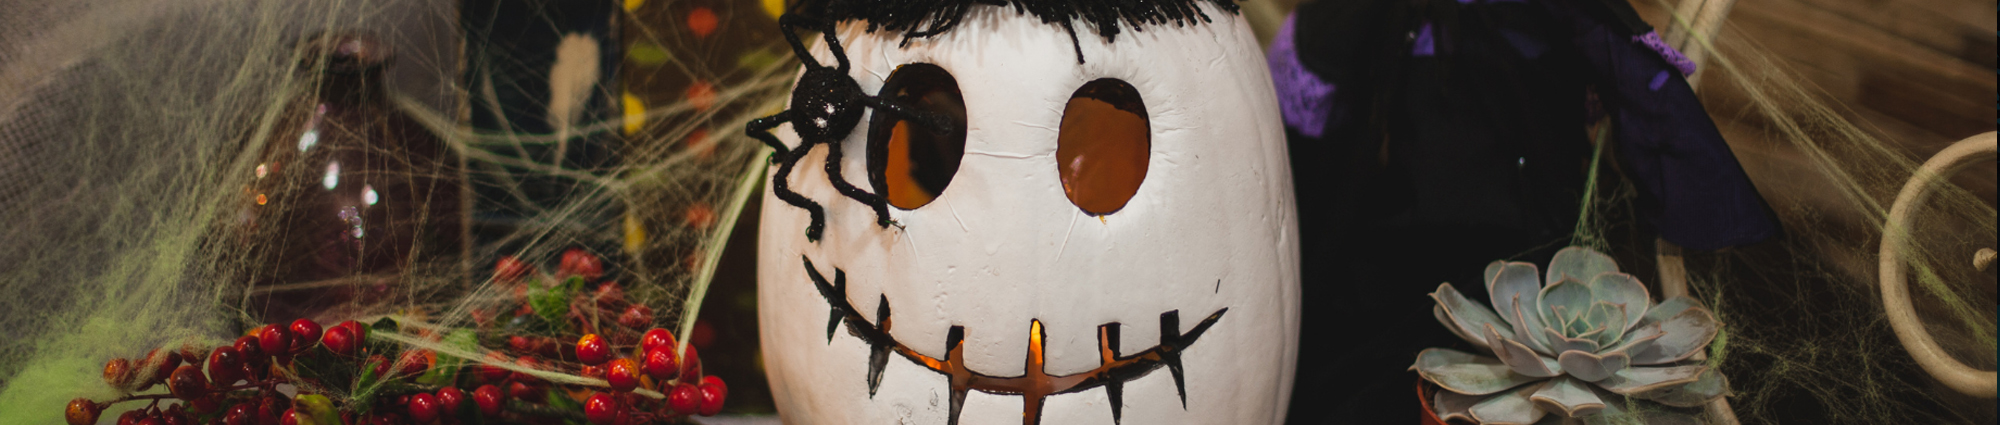 image of decorated pumpkin